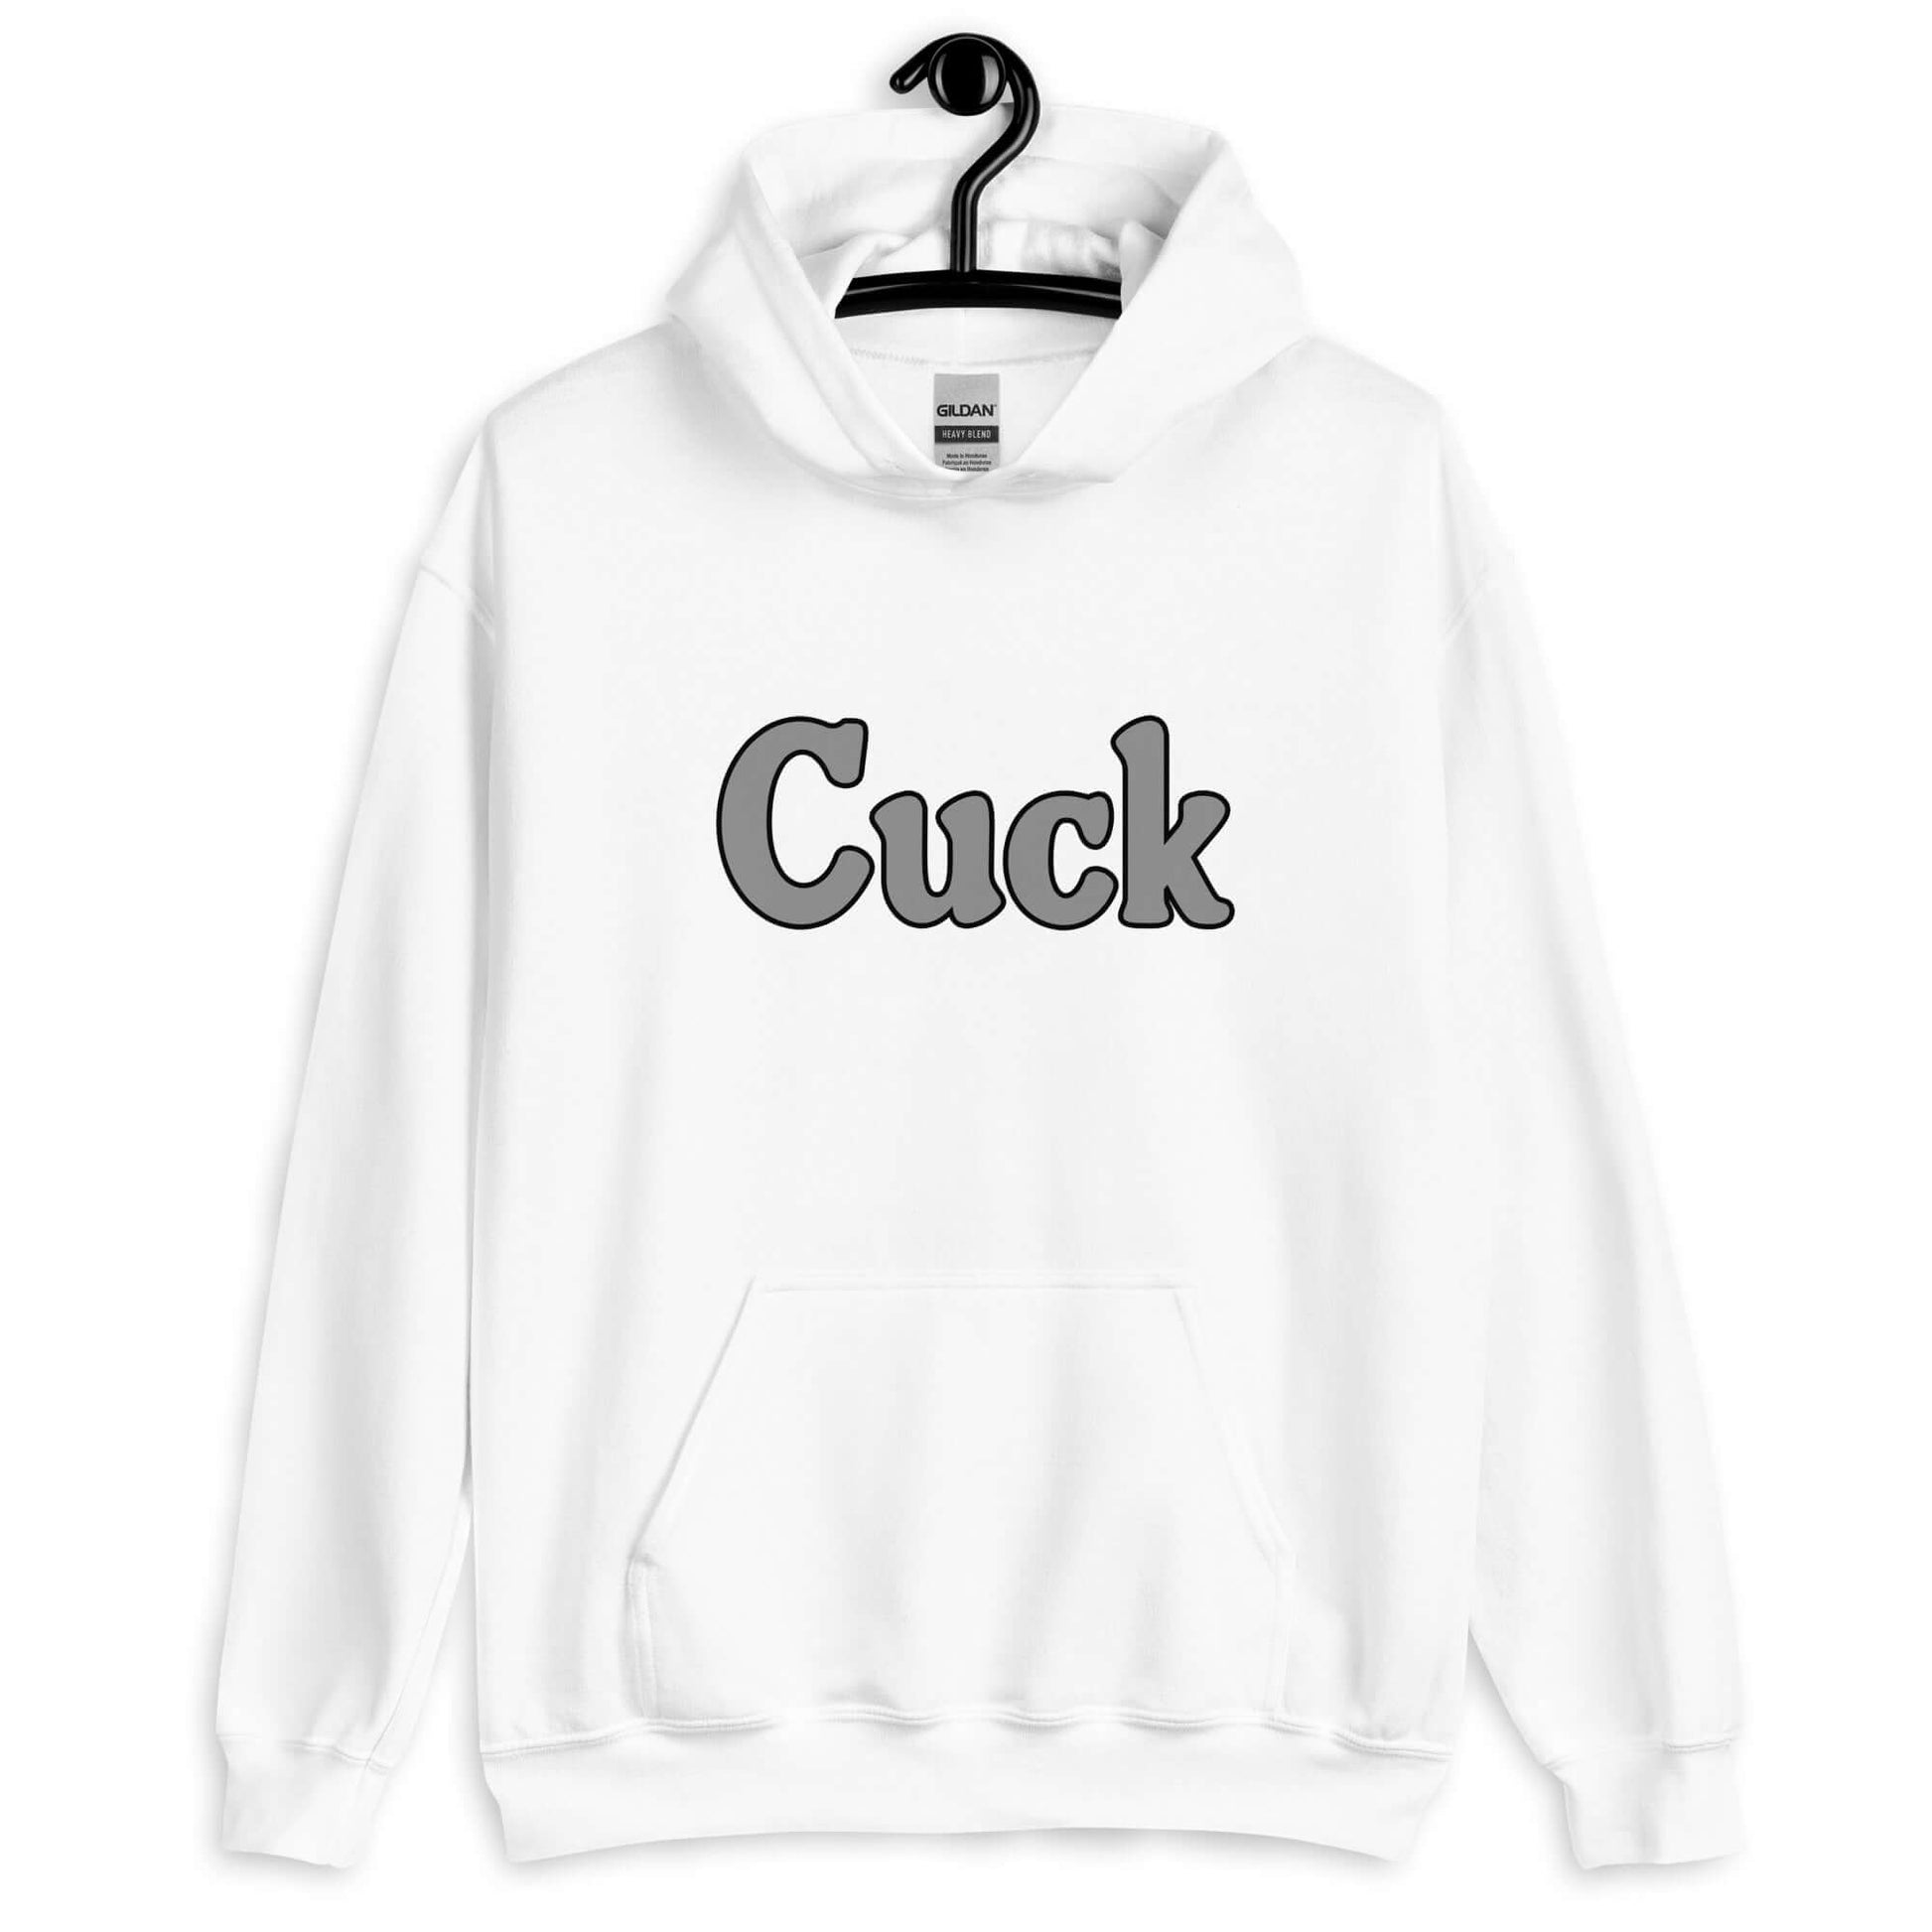 White hoodie sweatshirt with the word Cuck printed on the front in grey.